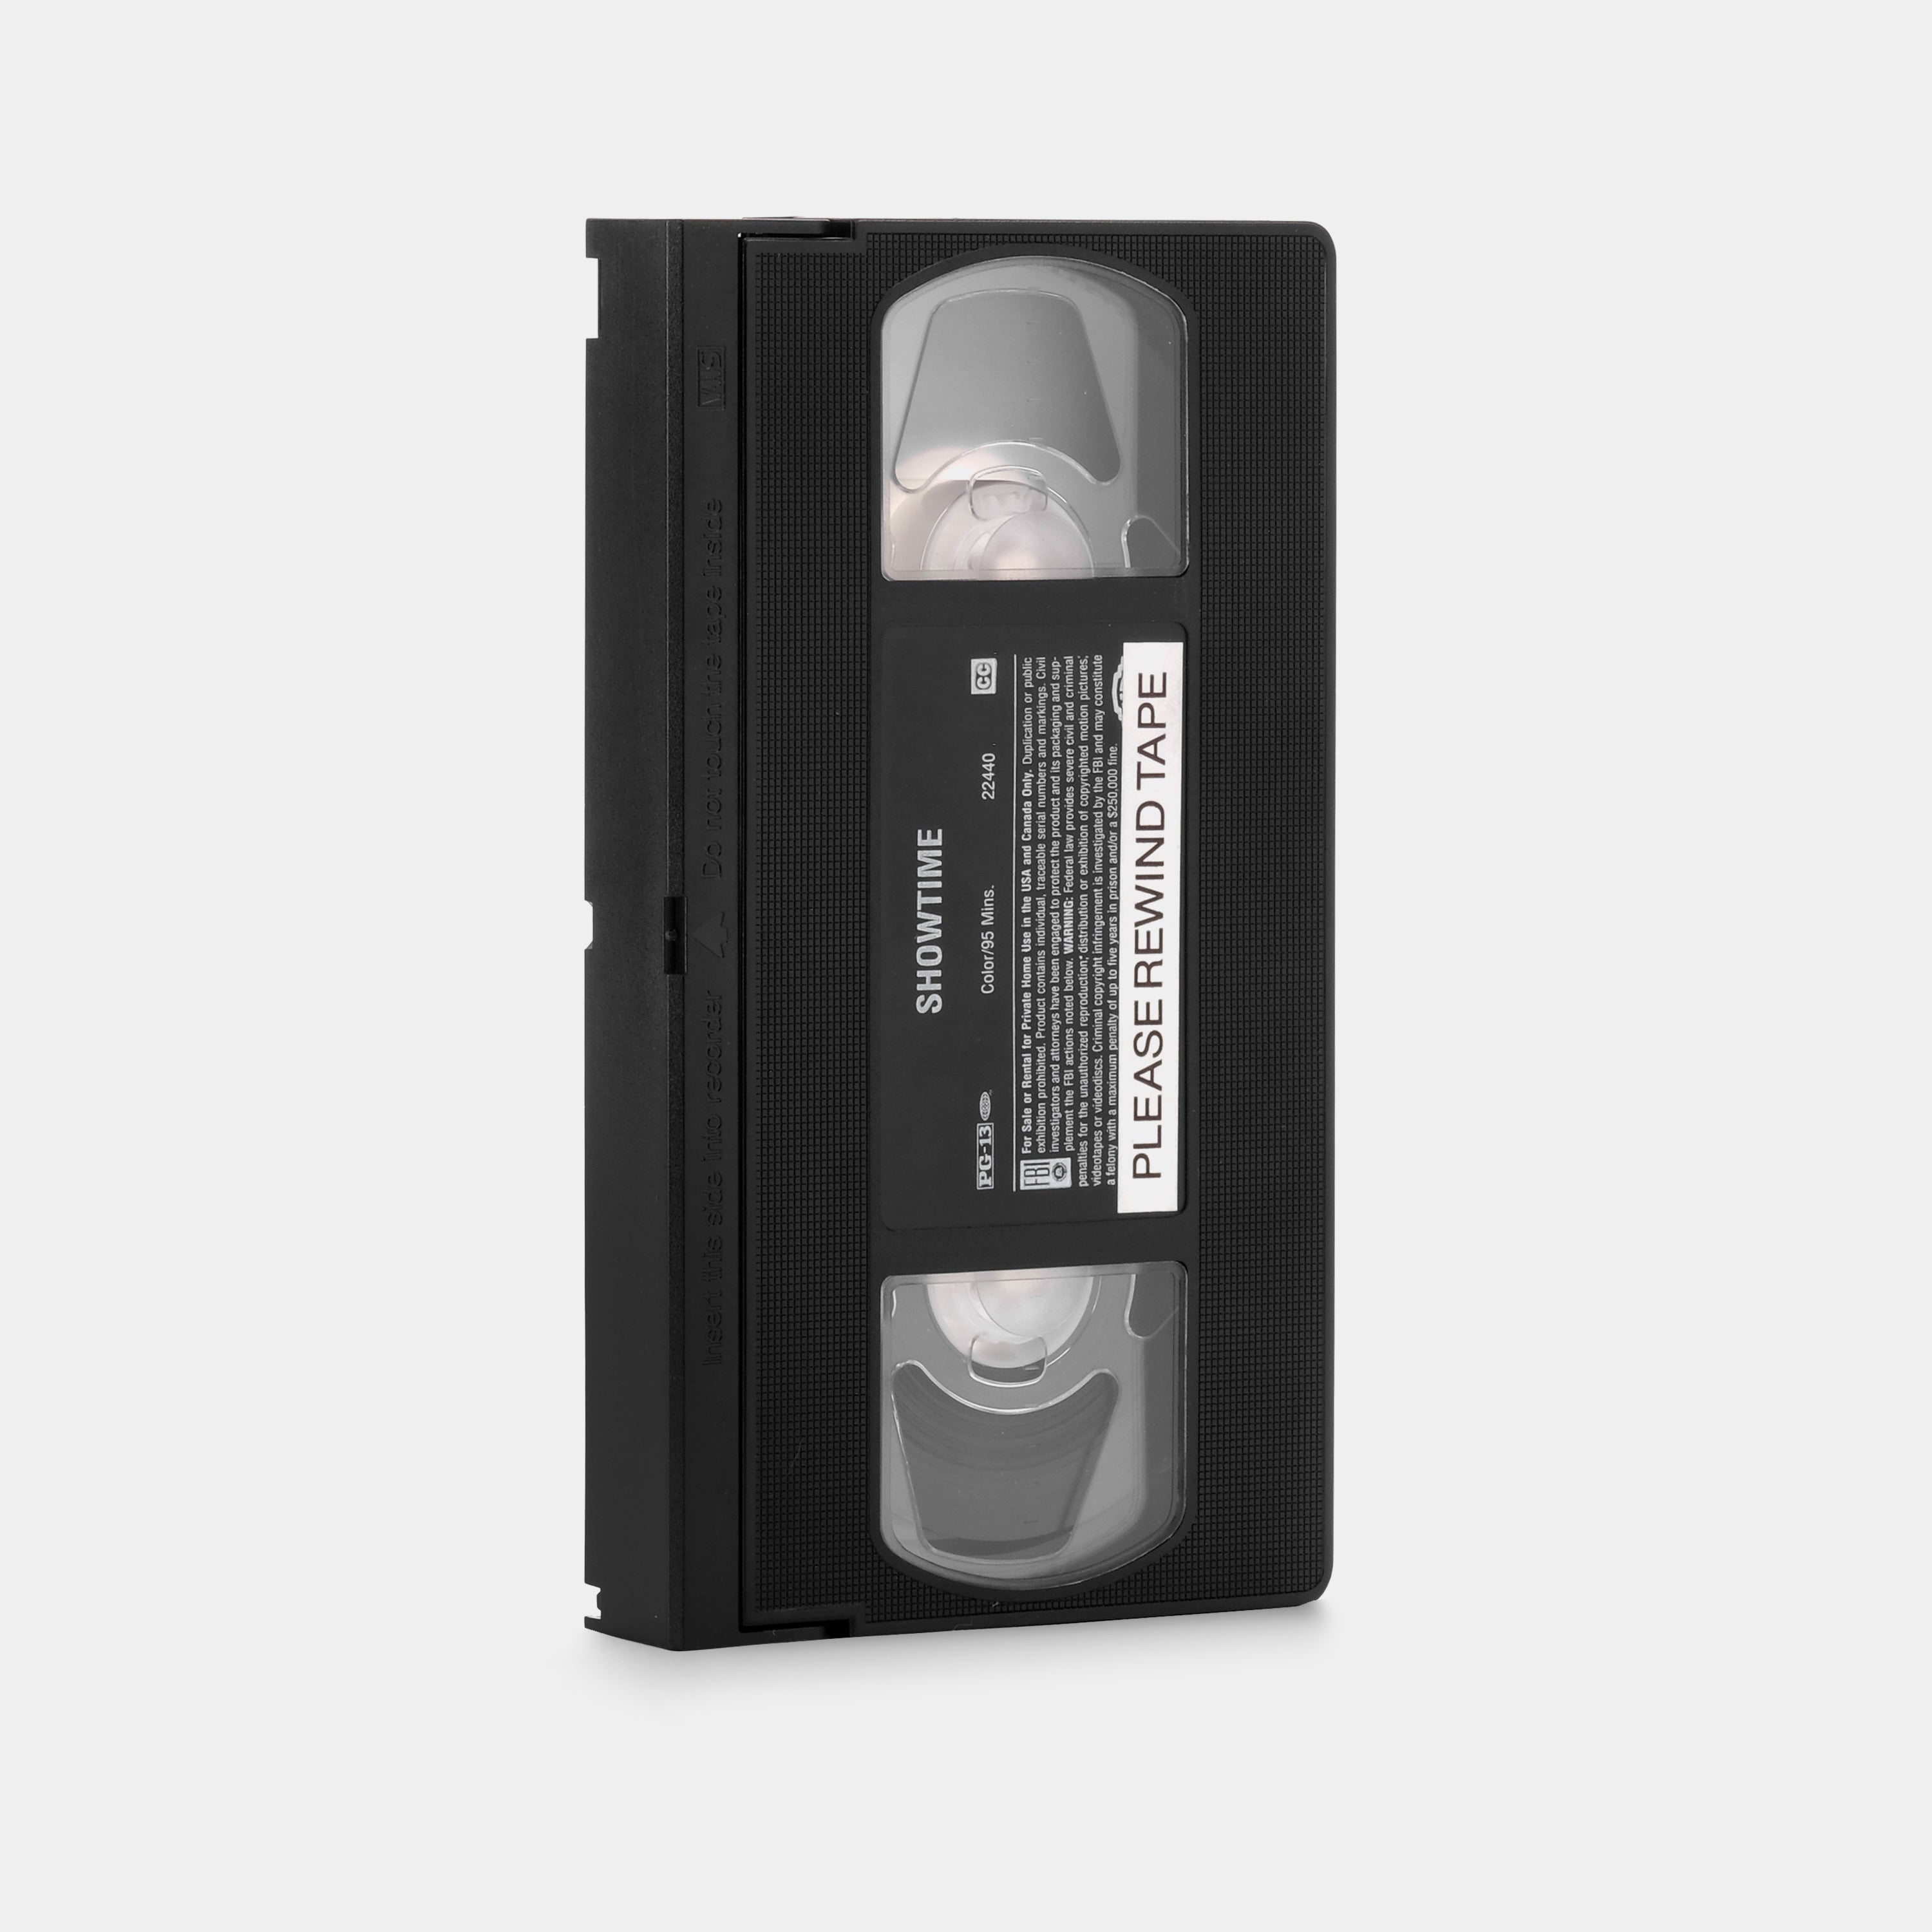 Showtime VHS Tape